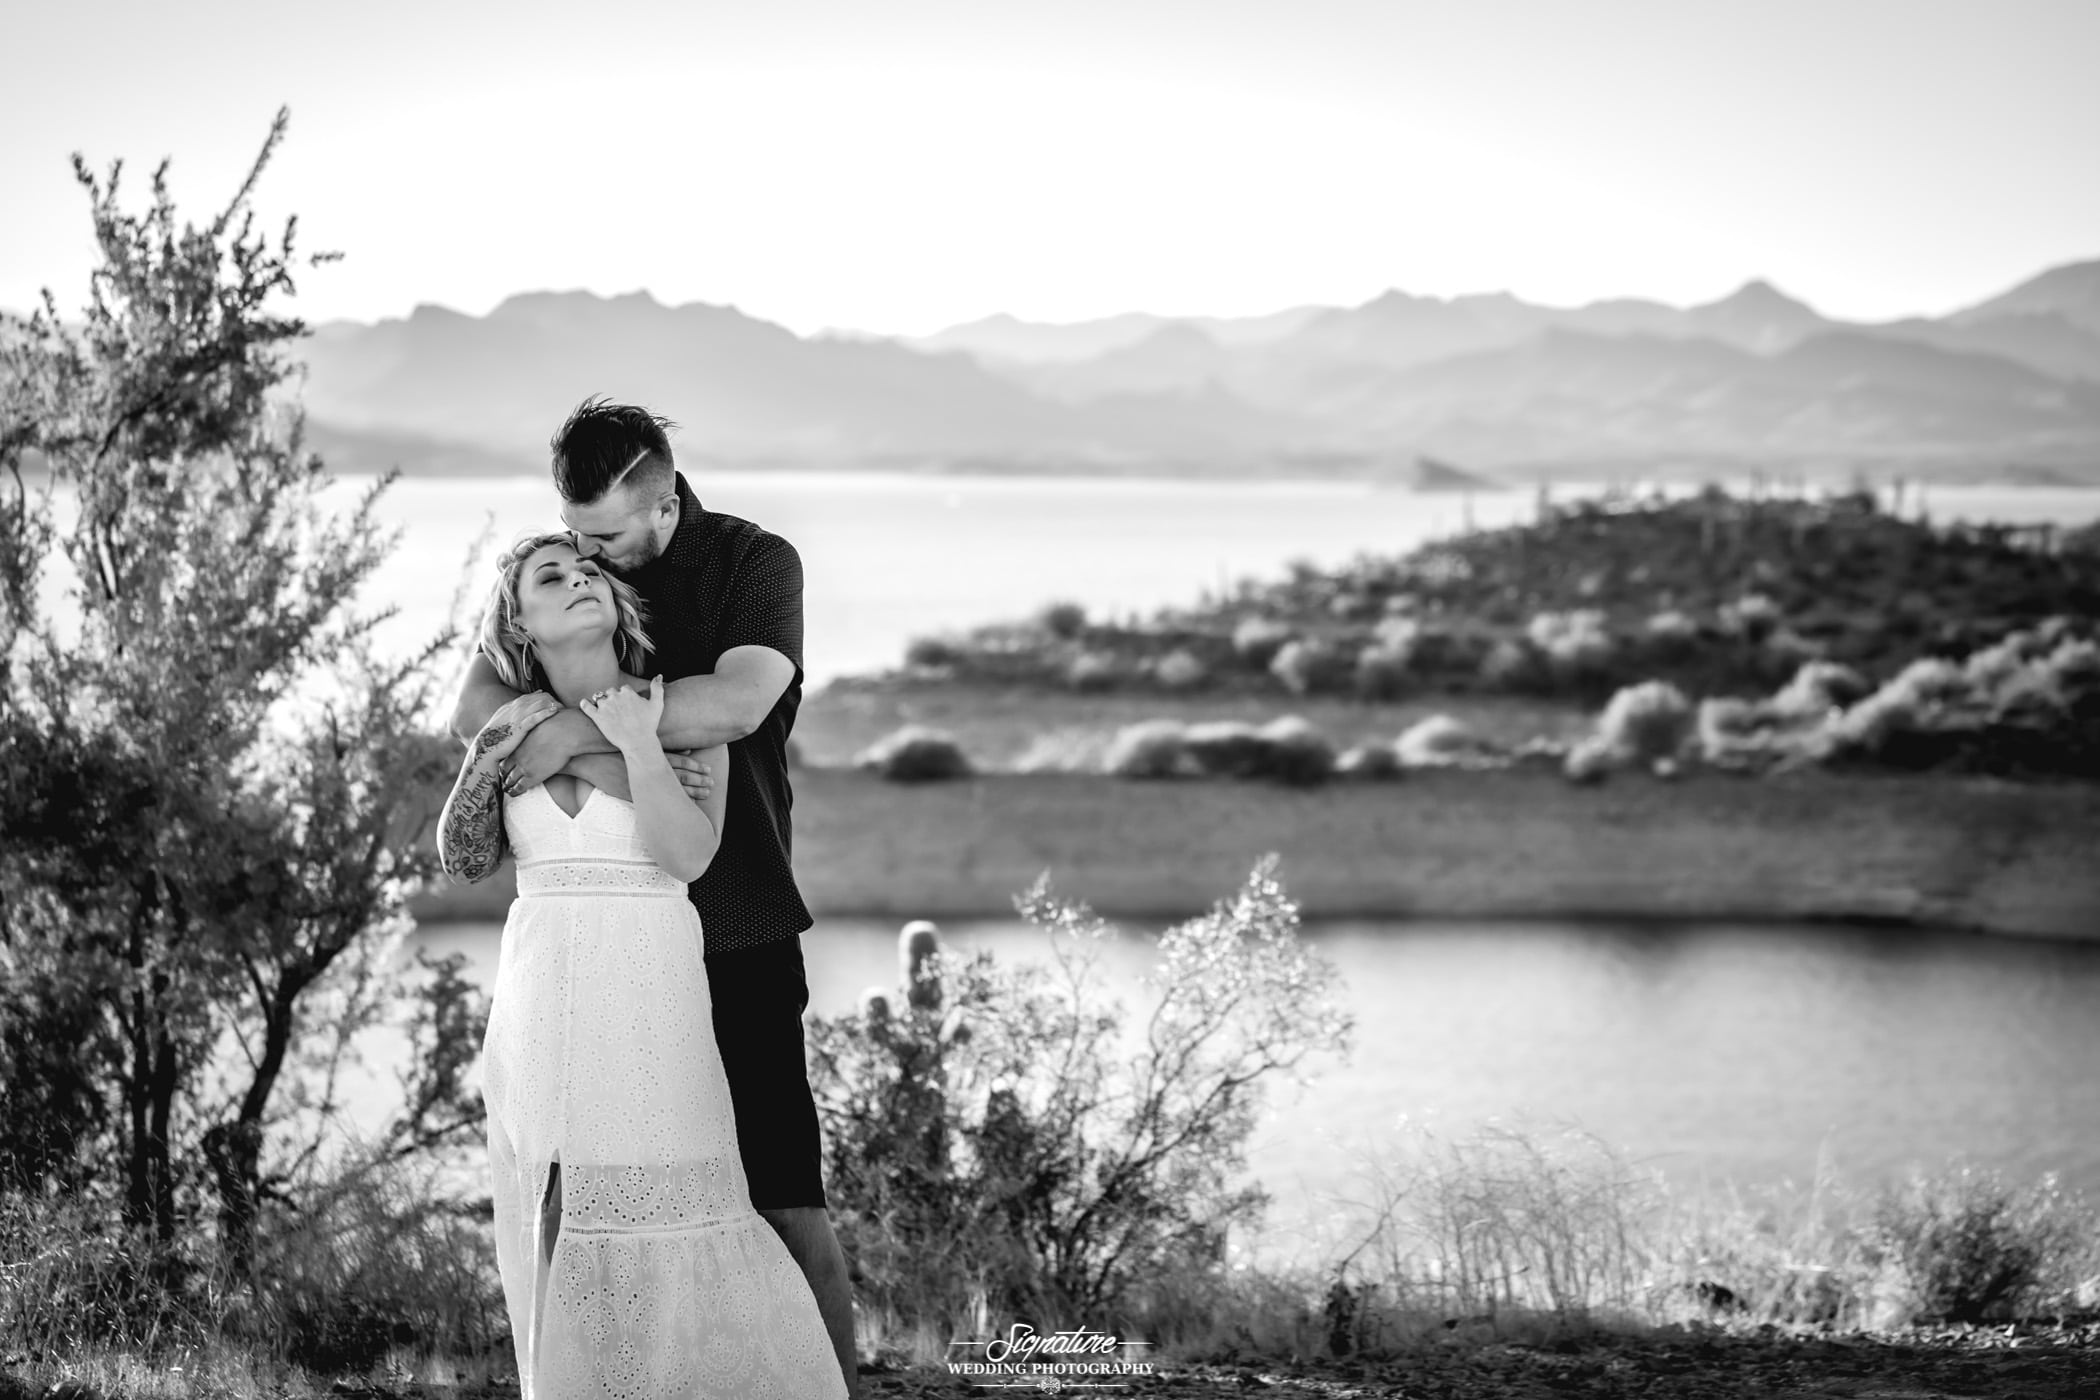 Man hugging woman from behind in front of lake in desert black and white